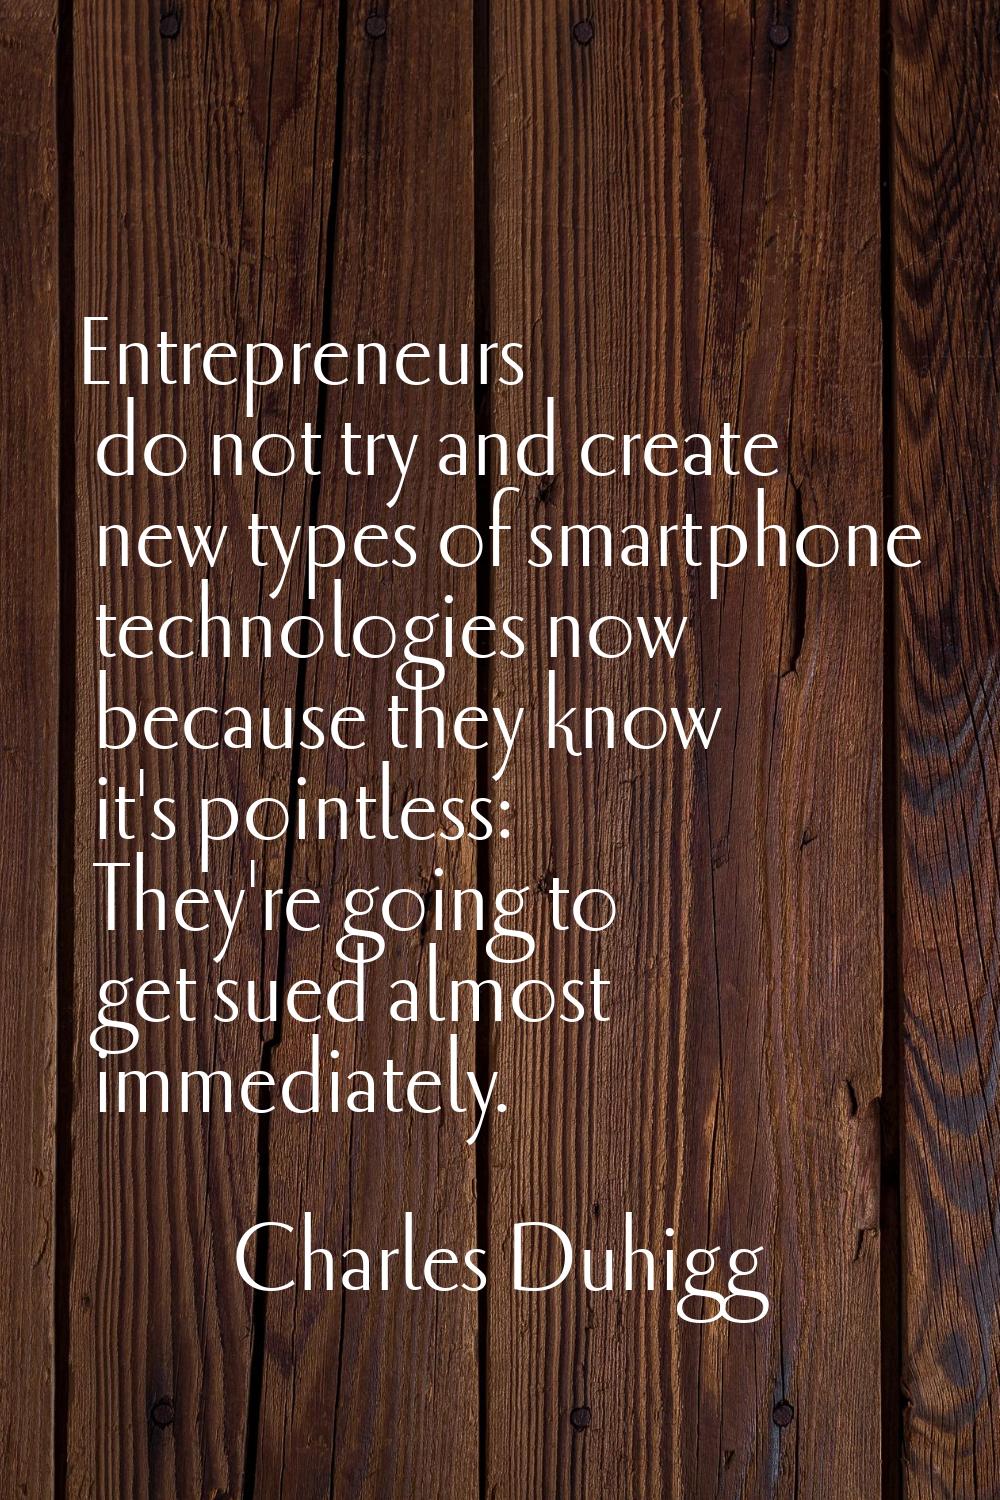 Entrepreneurs do not try and create new types of smartphone technologies now because they know it's